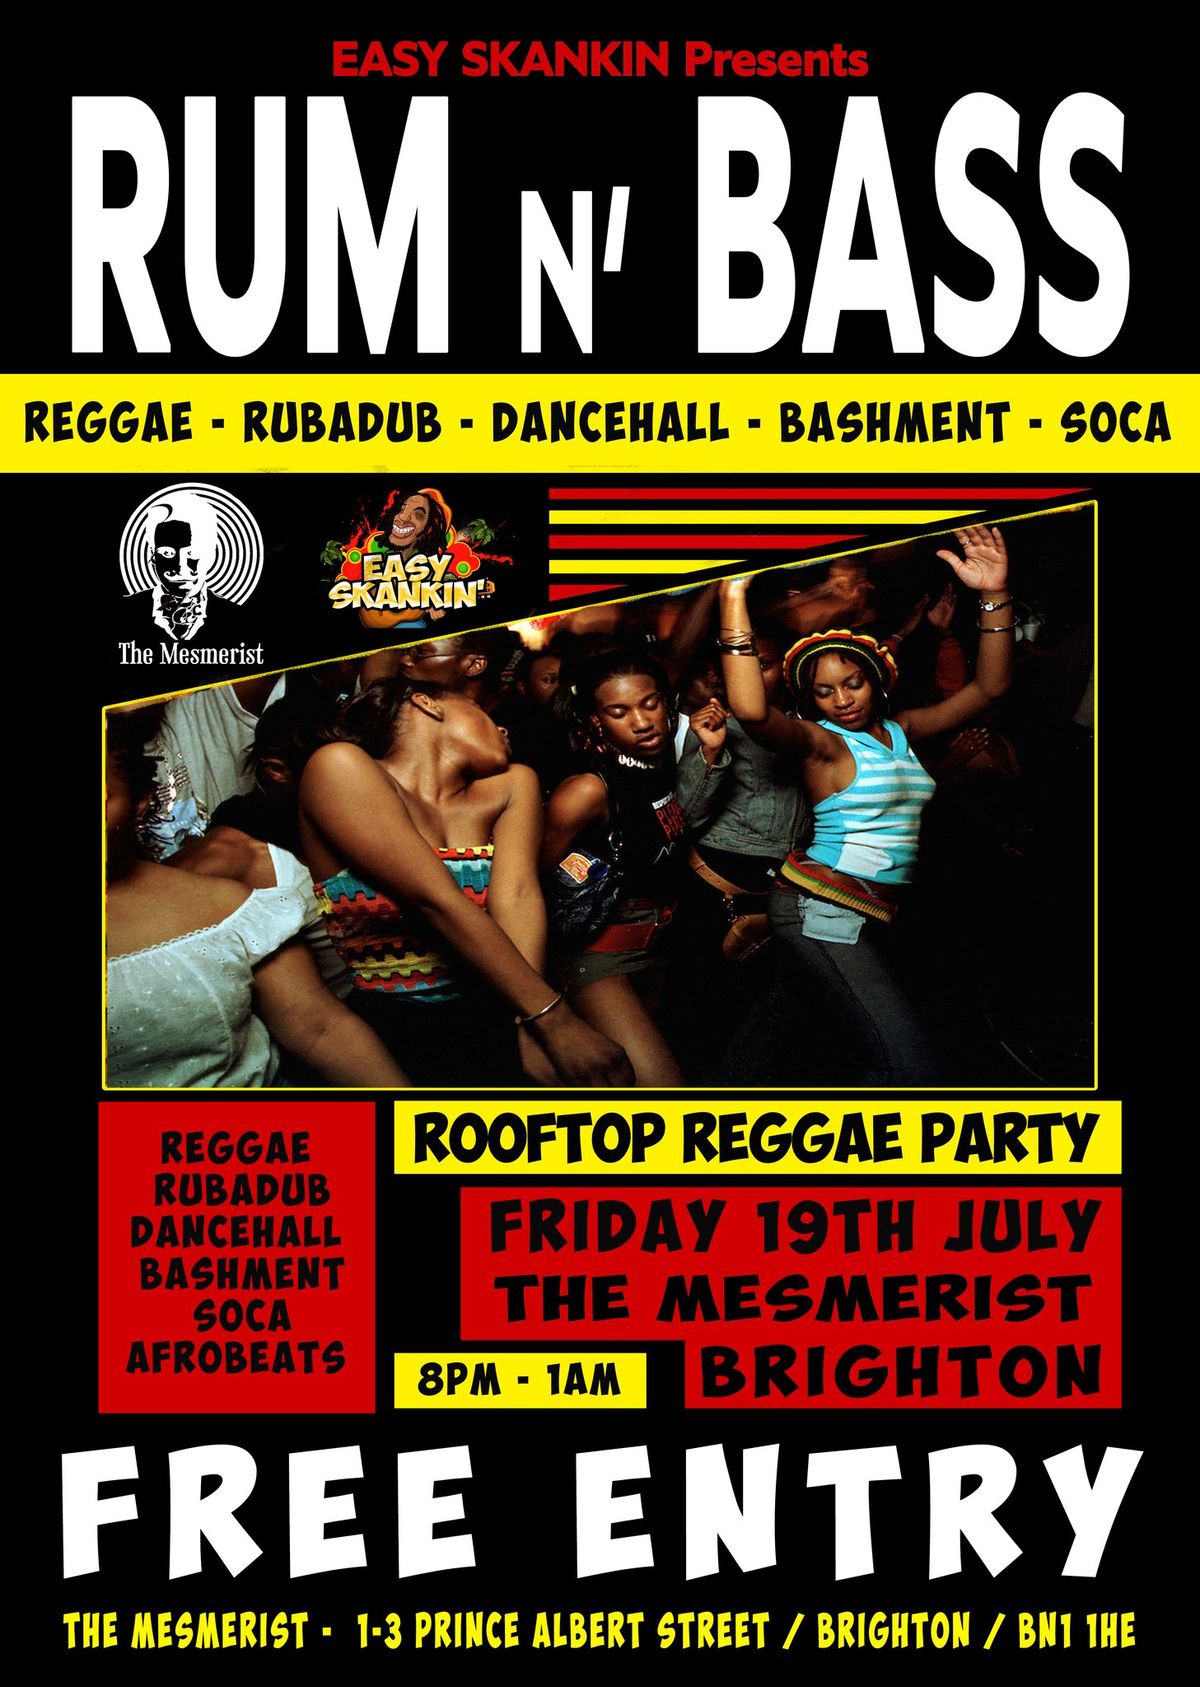 Rum N' Bass - Rooftop Reggae Party \/\/ The Mesmerist - FREE ENTRY